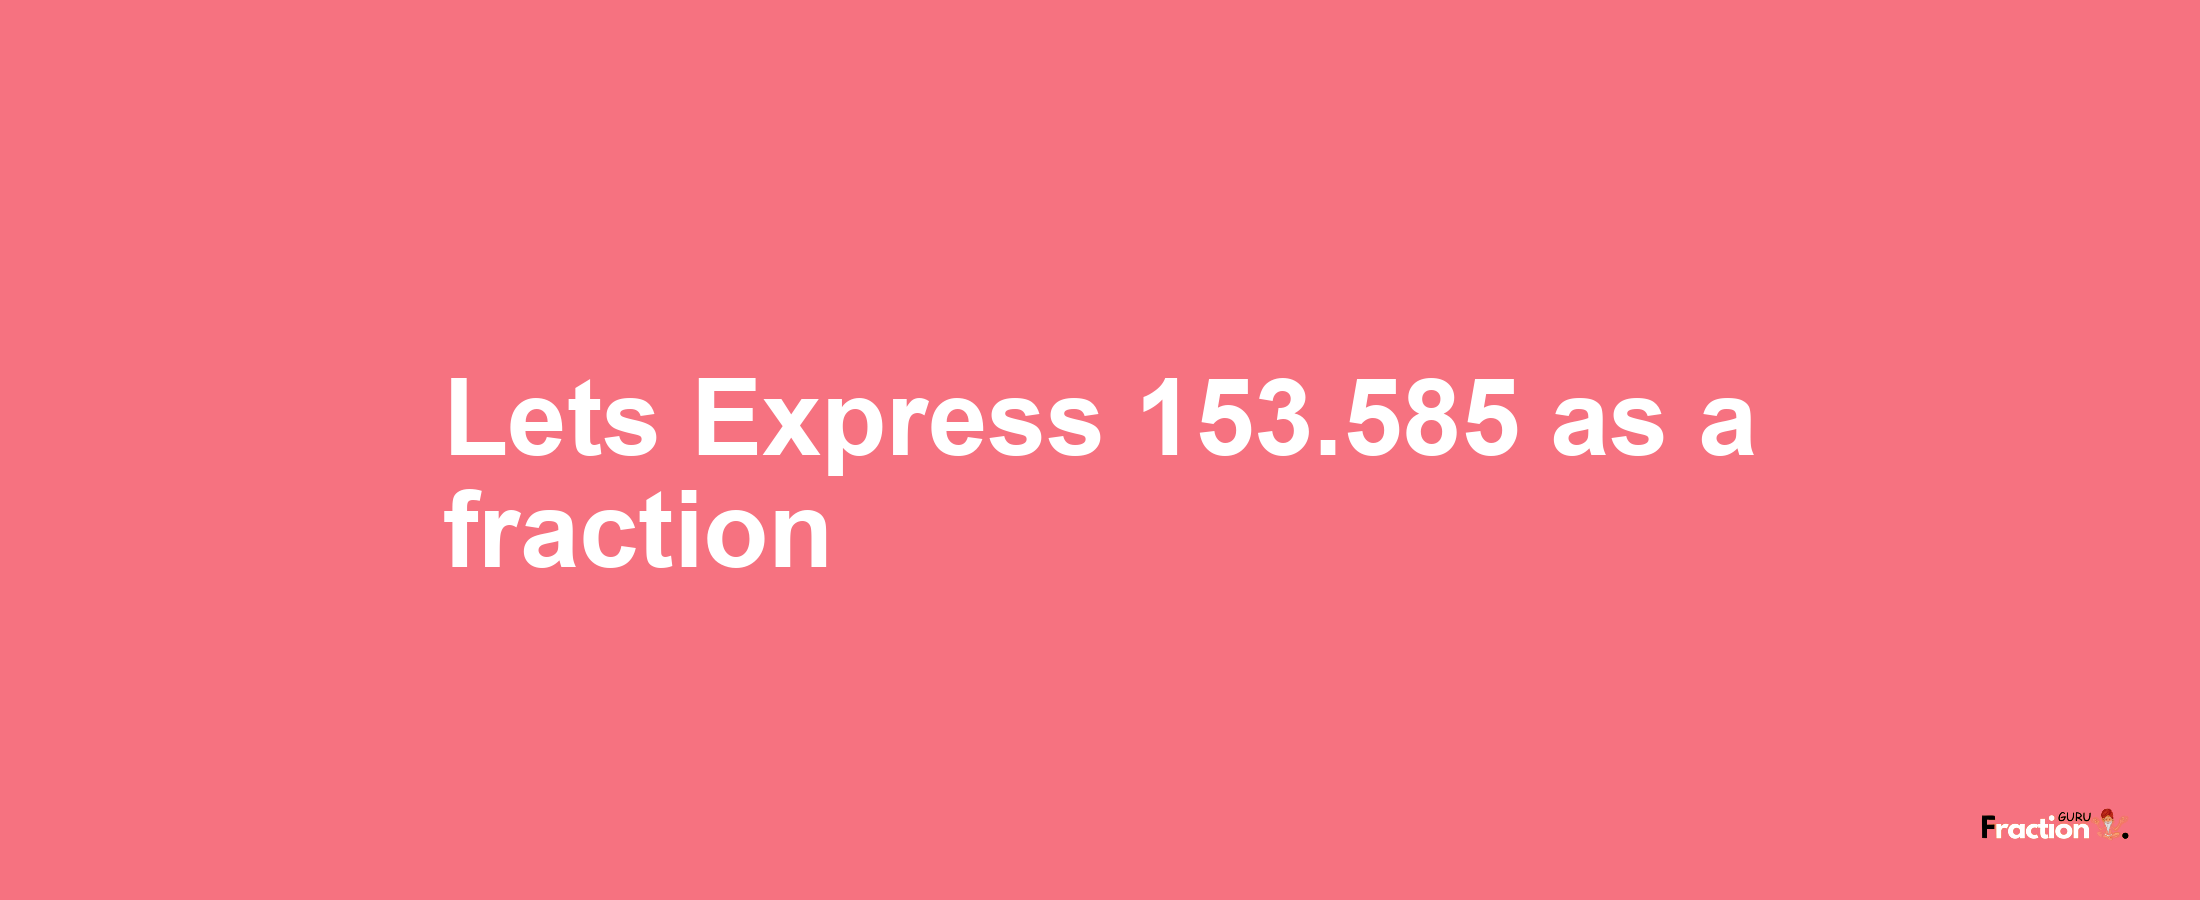 Lets Express 153.585 as afraction